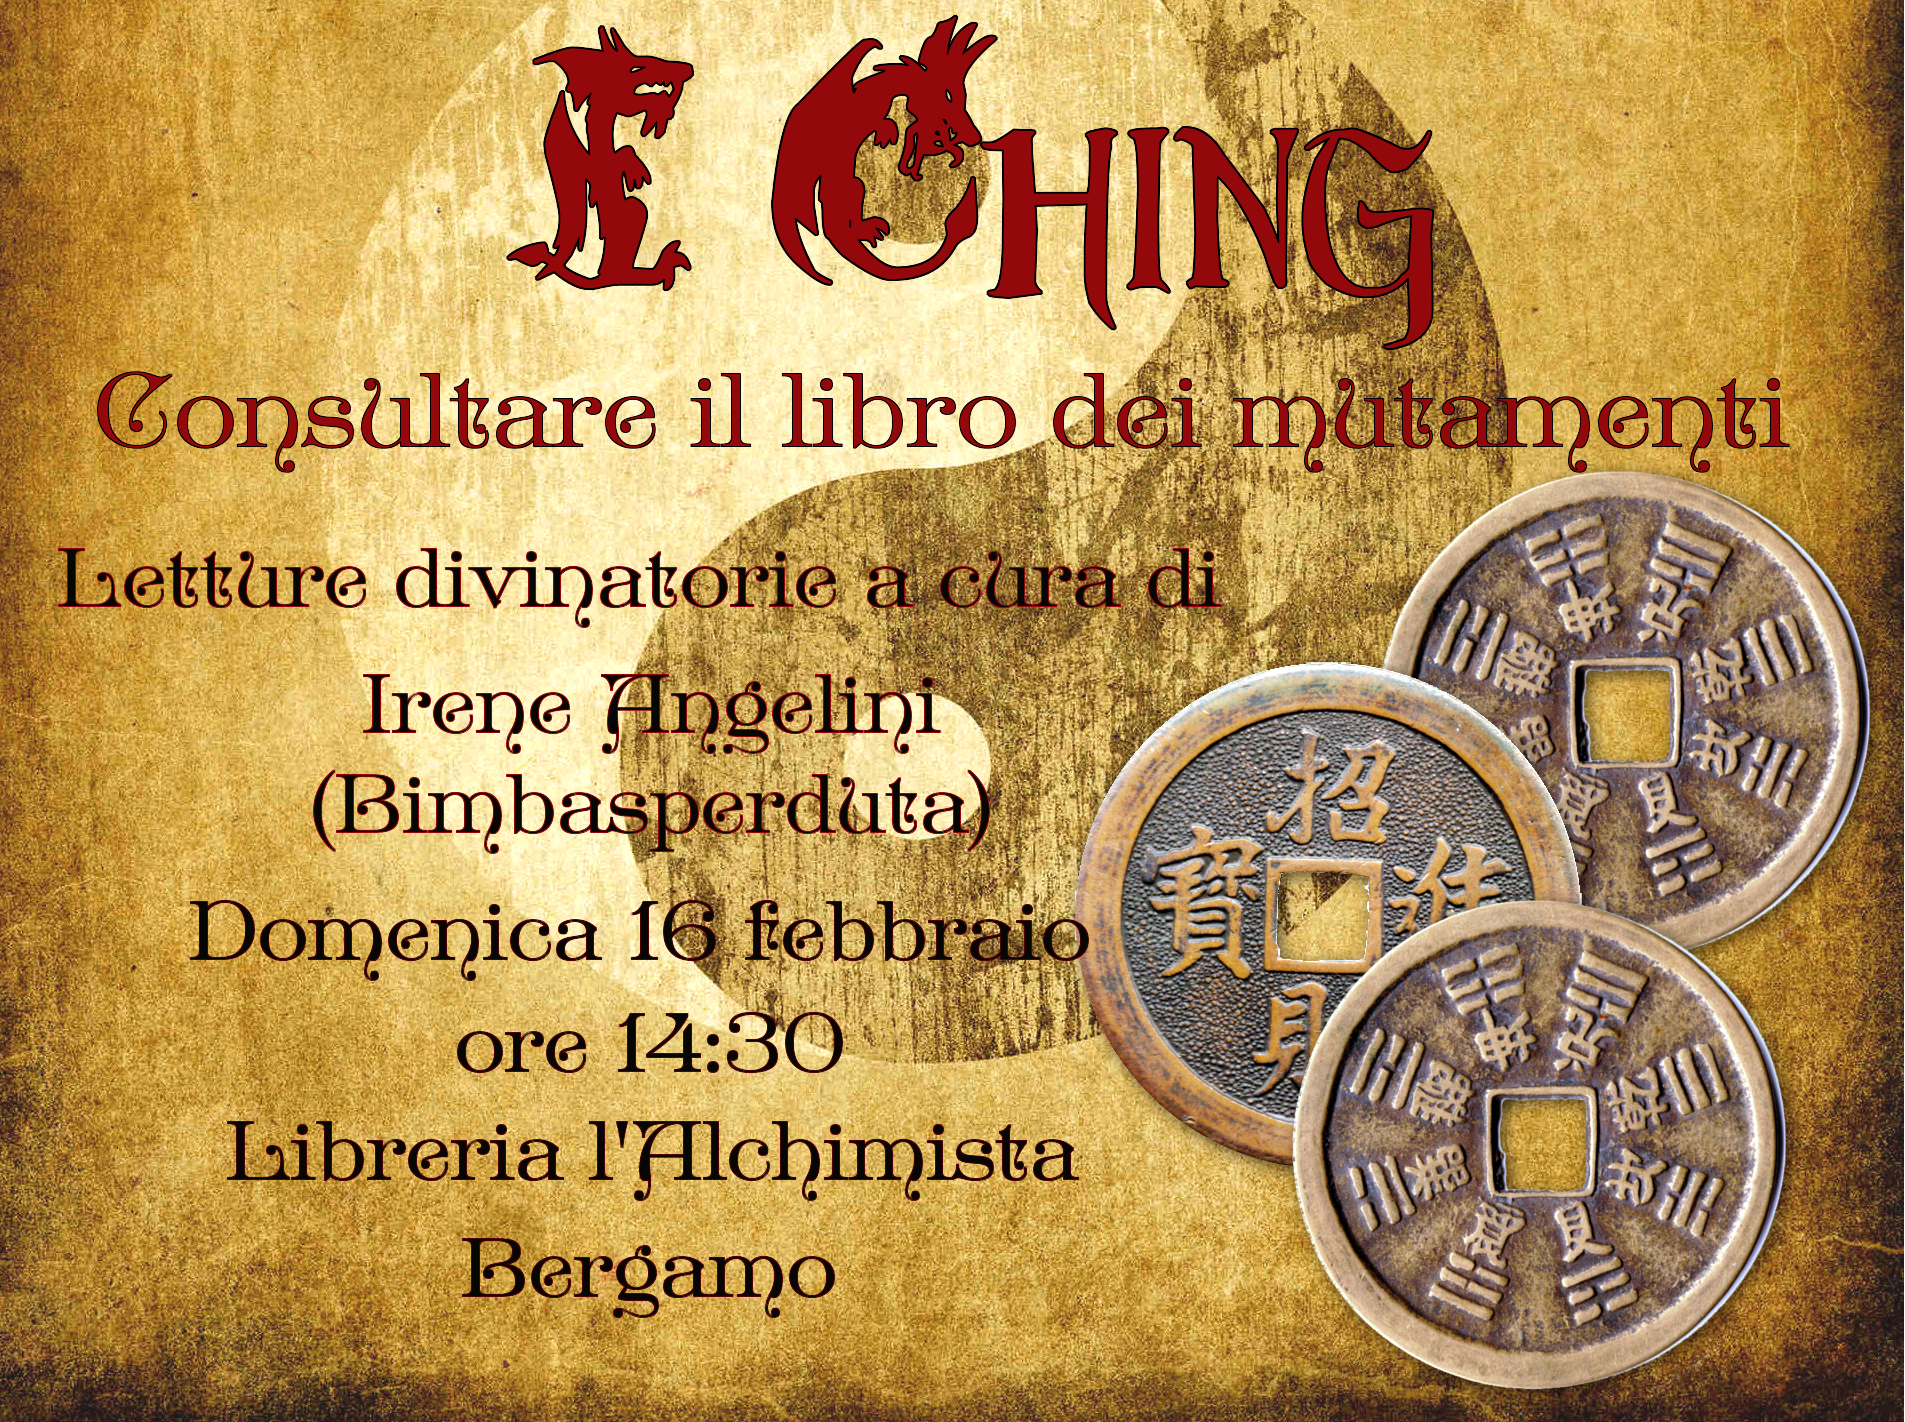 Letture divinatorie dell’I-ching